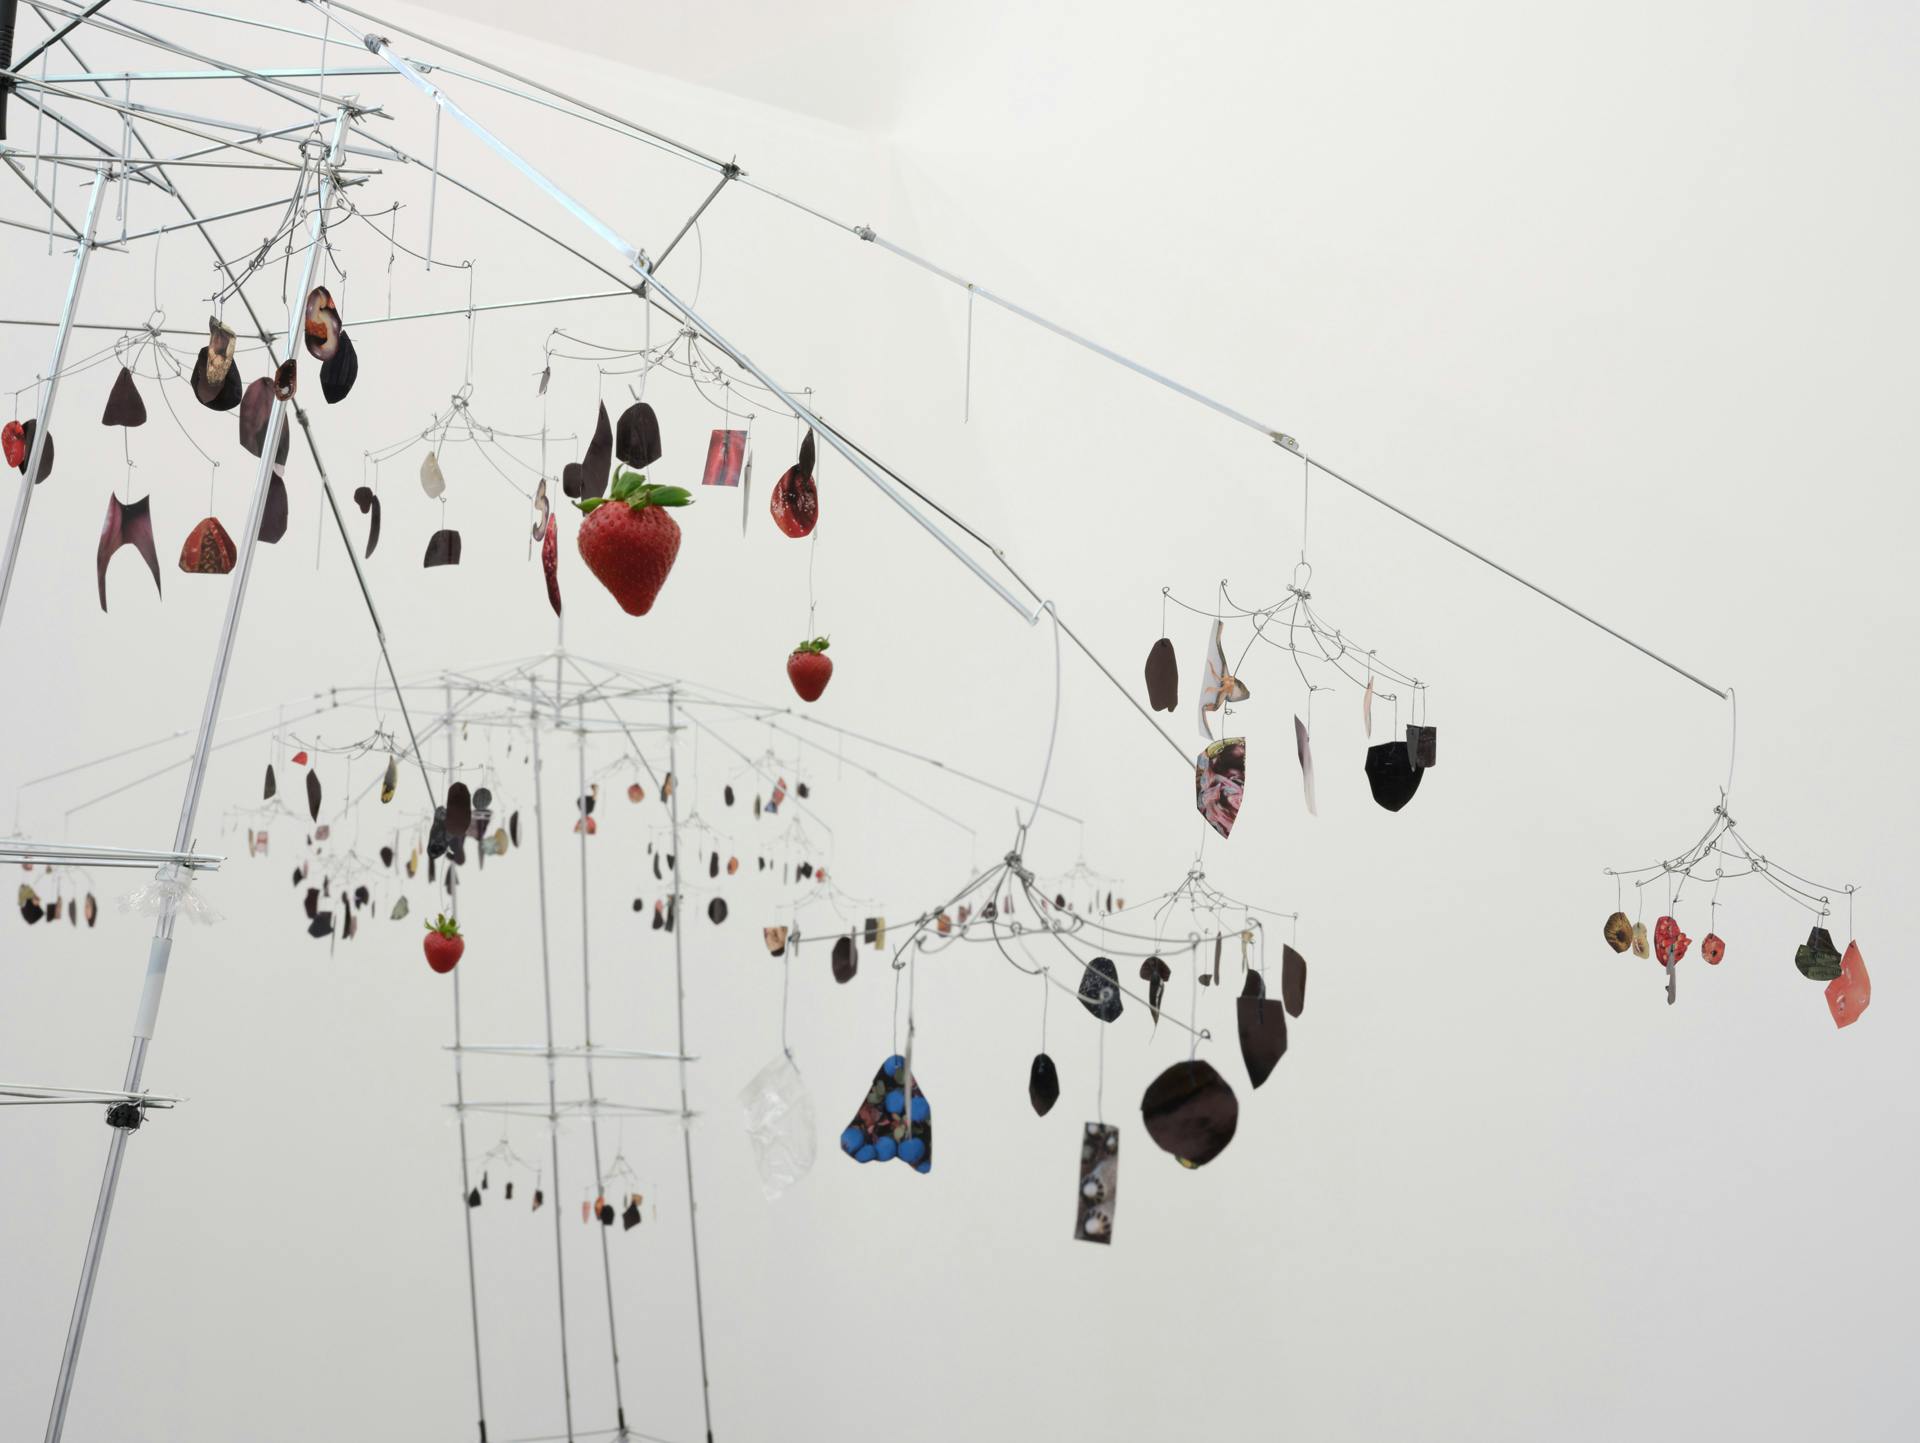 Paper cutouts and a strawberries hang from thin metal wires.